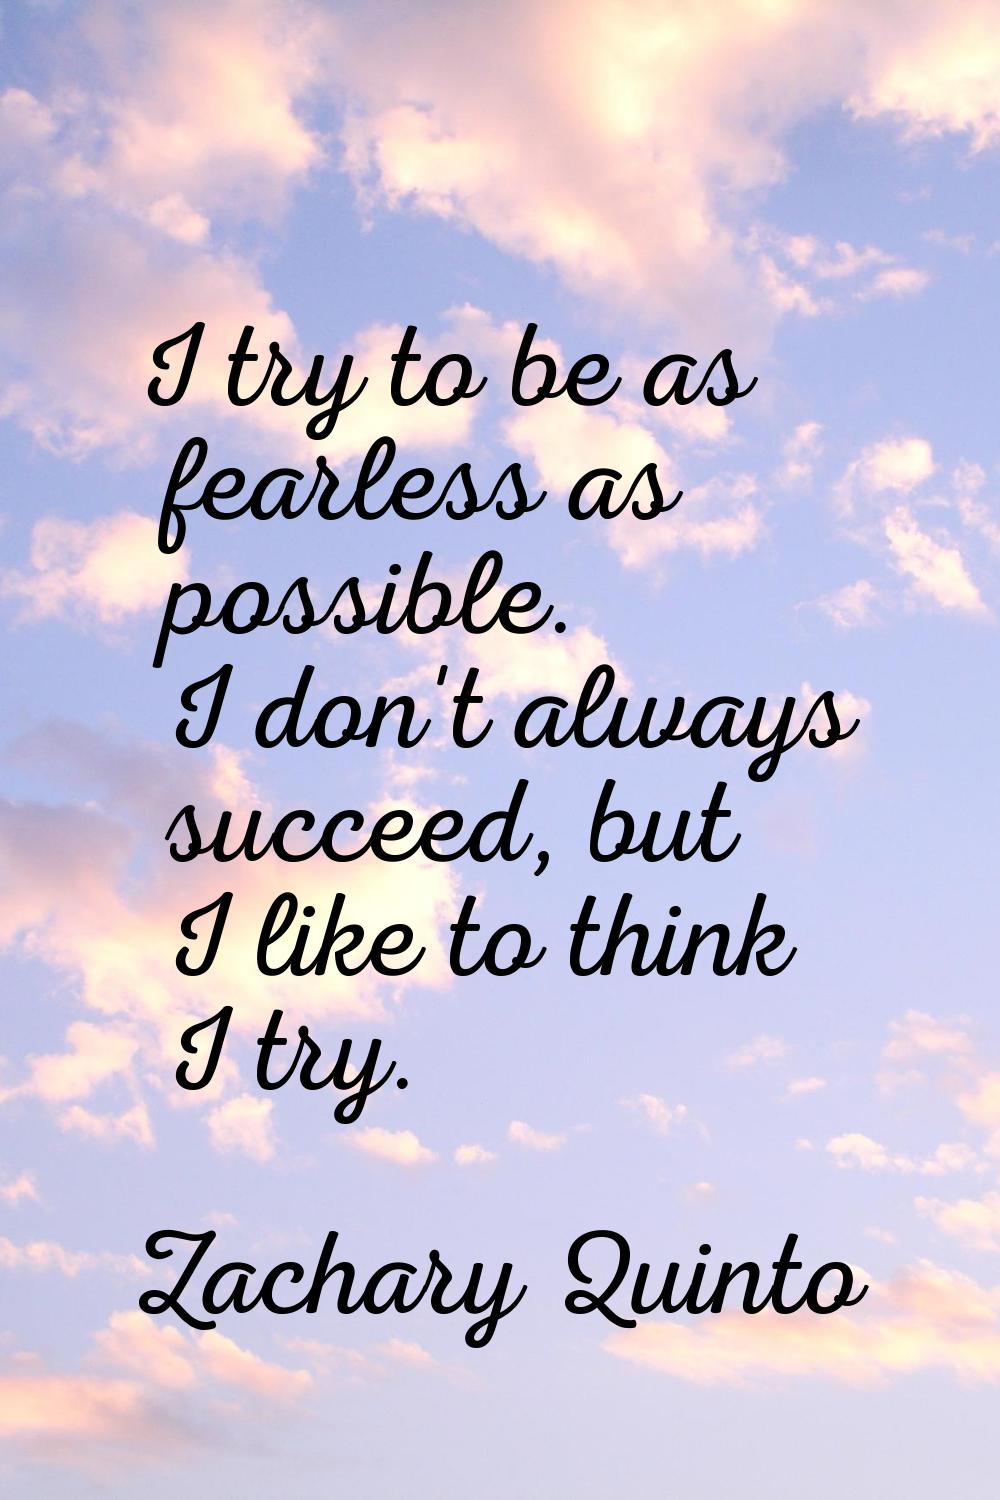 I try to be as fearless as possible. I don't always succeed, but I like to think I try.